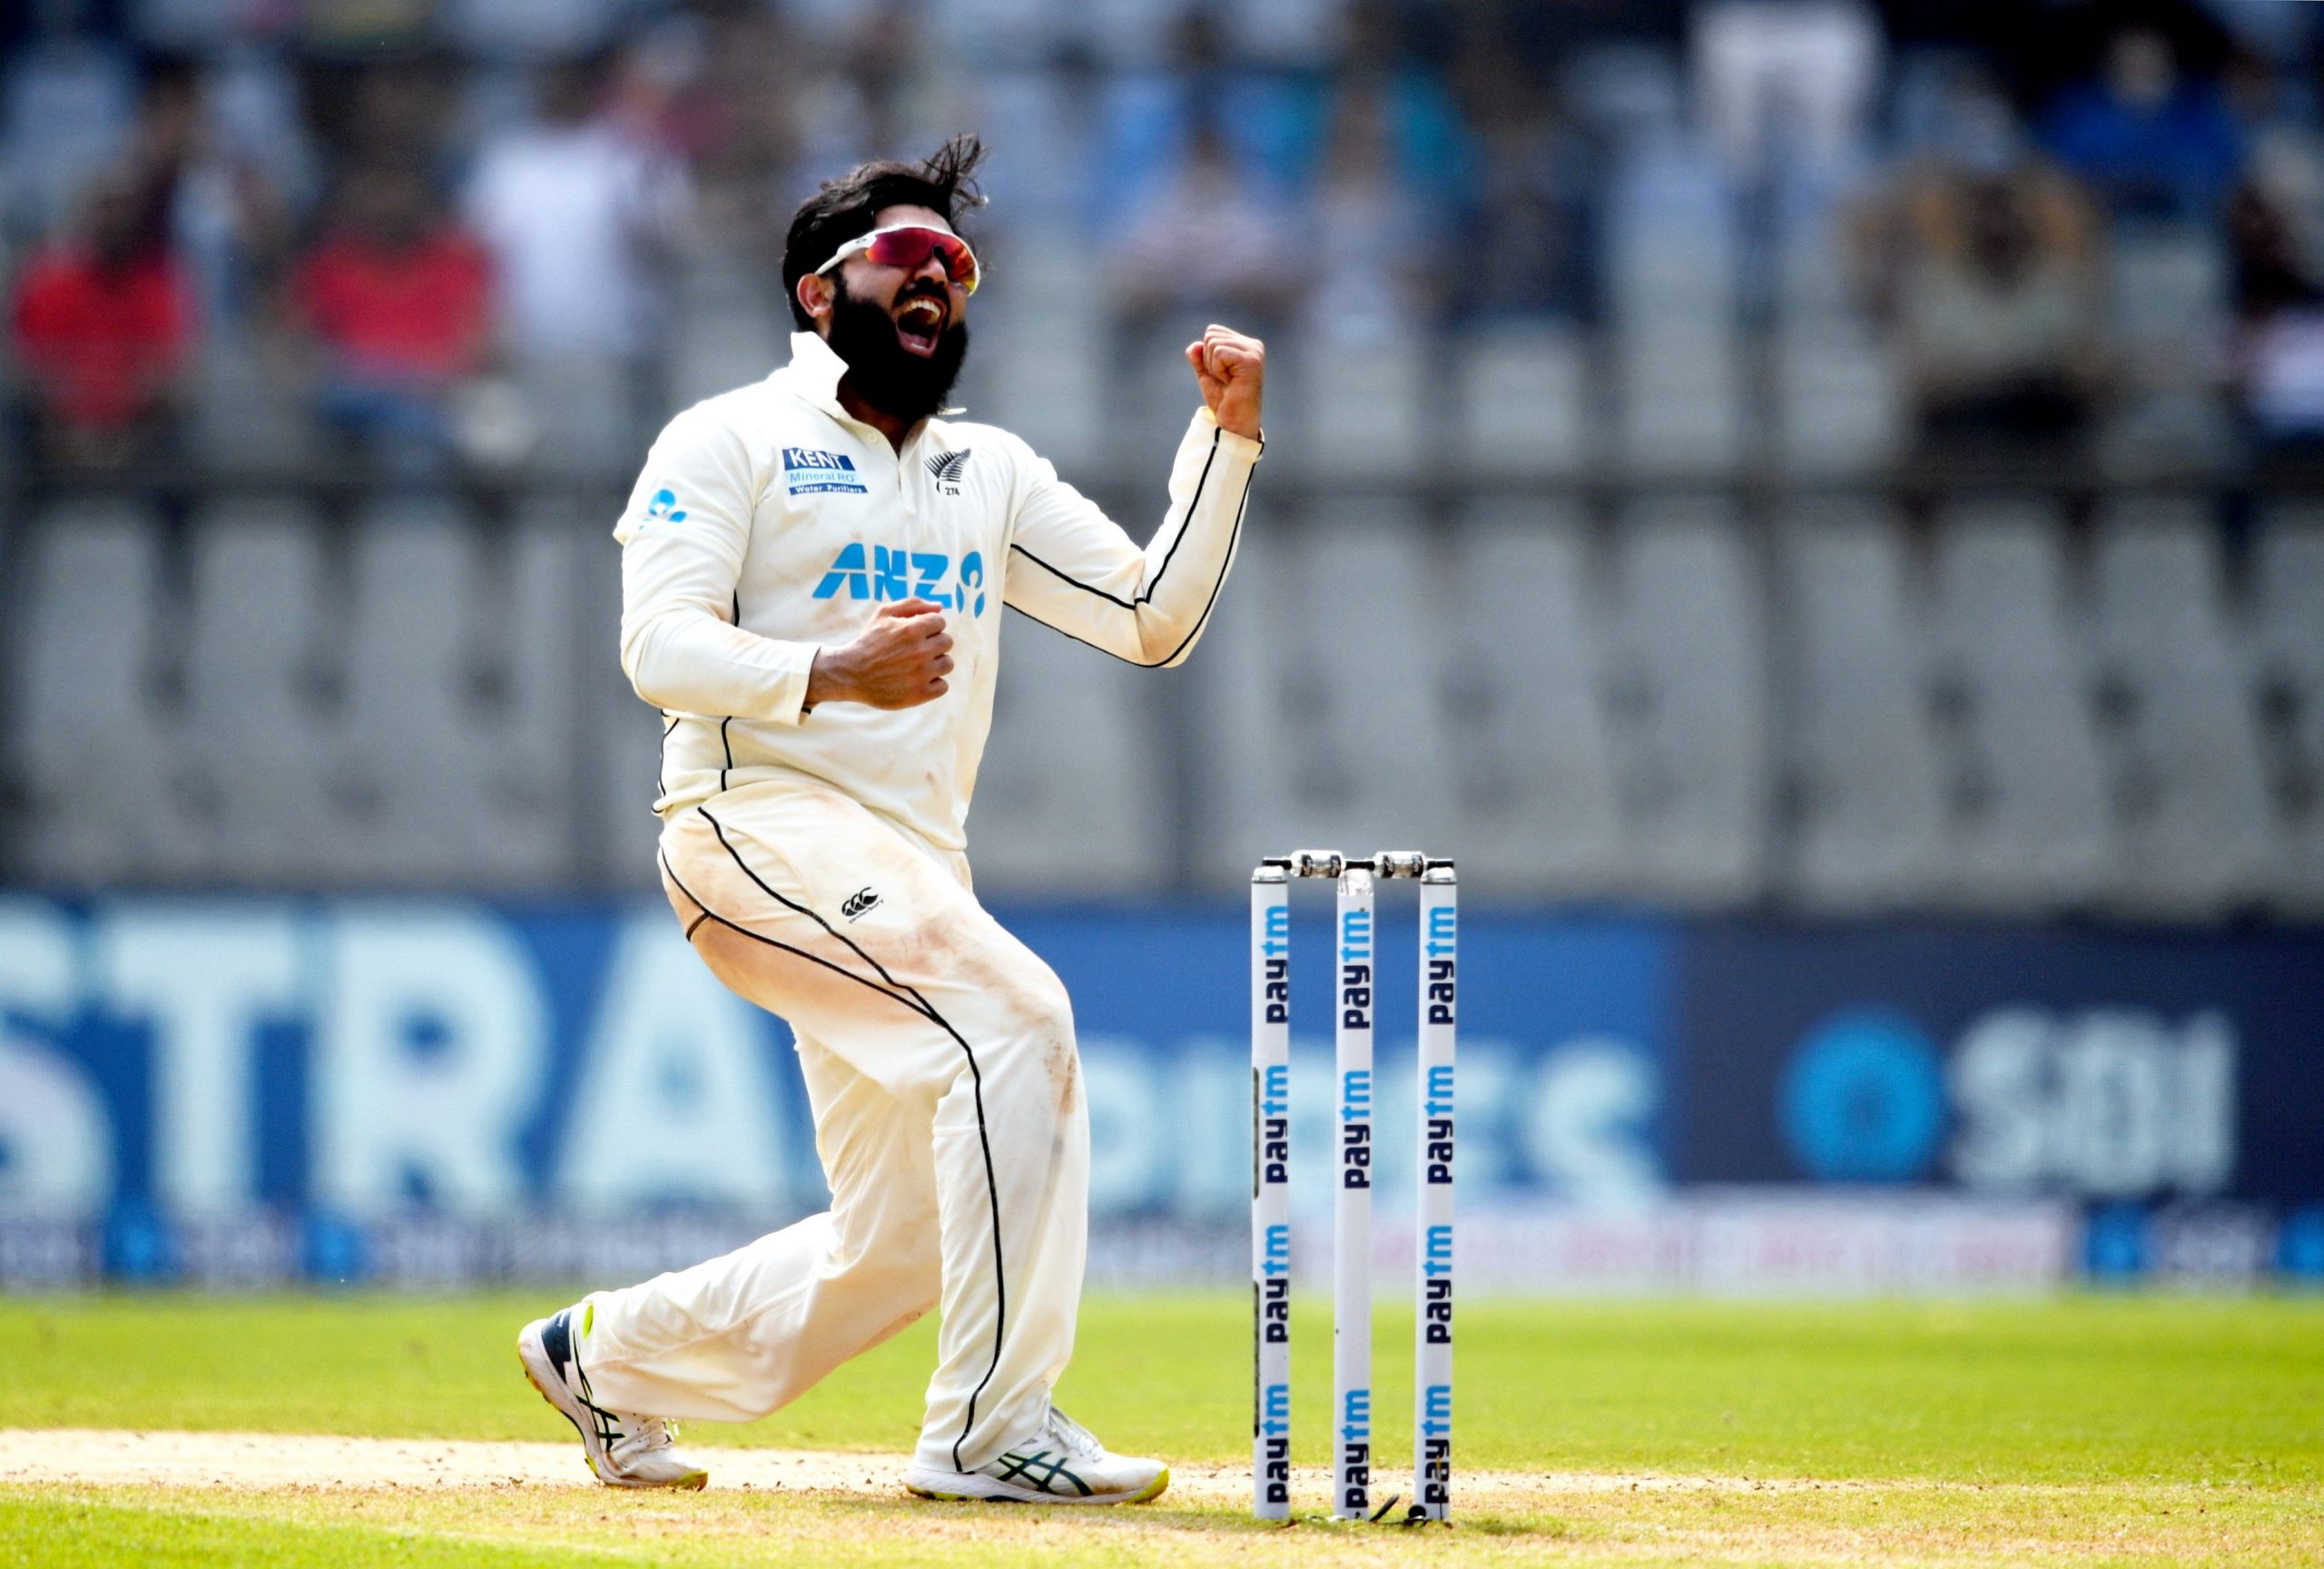 New Zealand’s Ajaz Patel named ICC Player of the Month for December